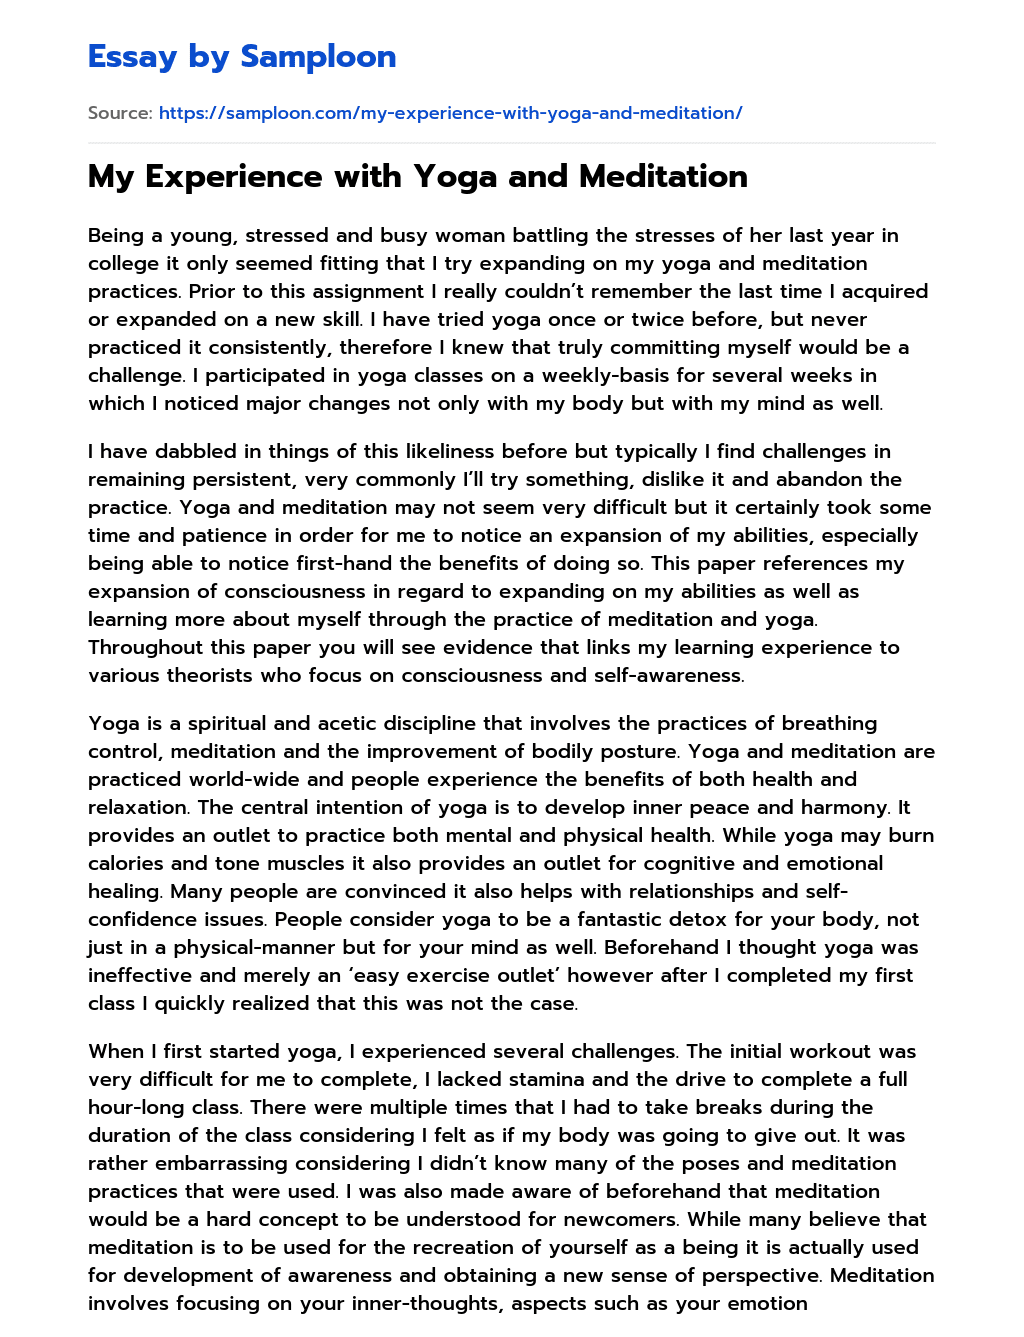 essay about yoga experience